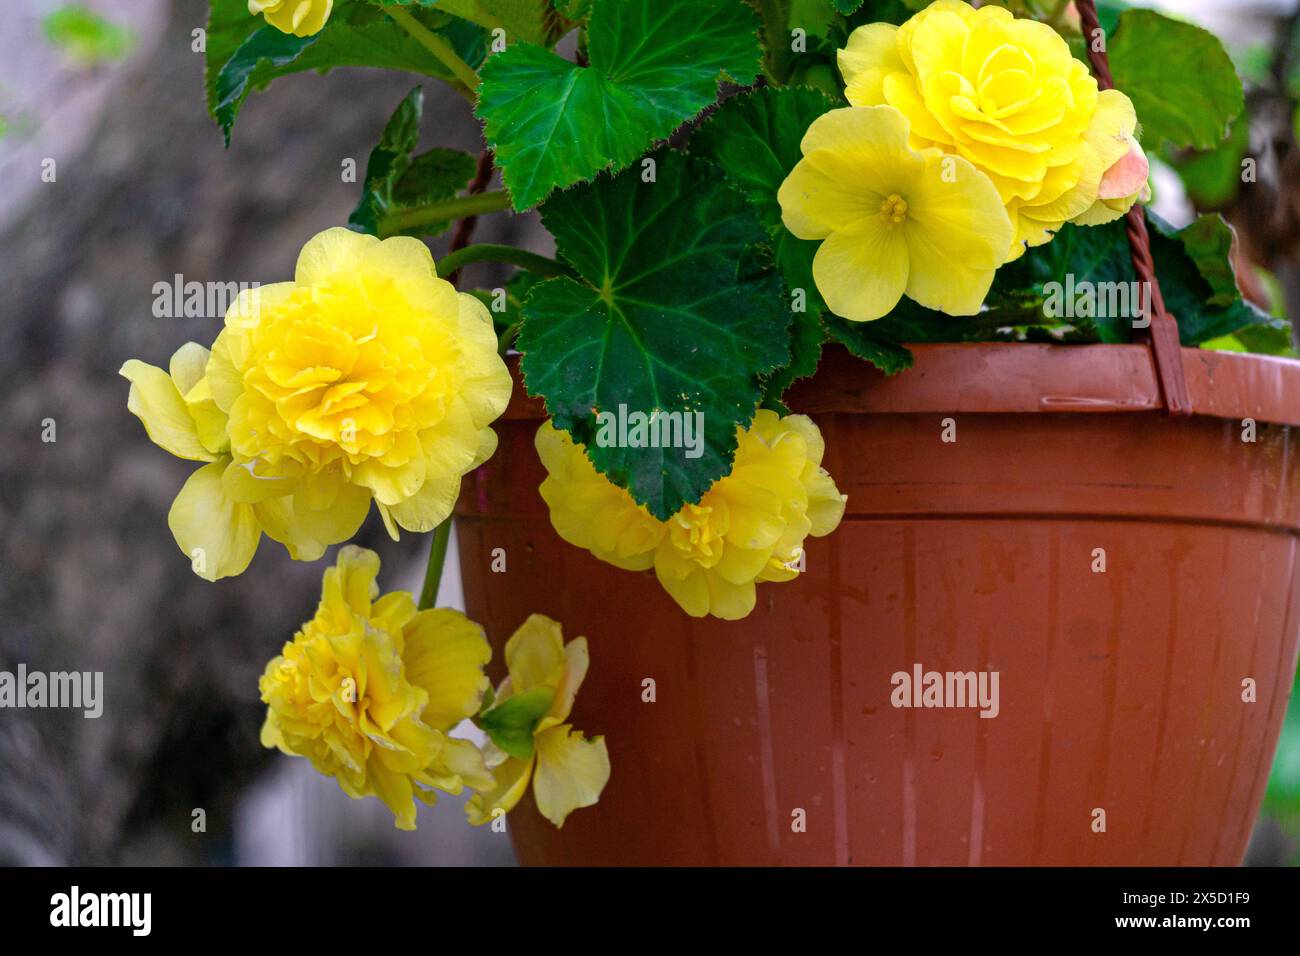 Beautiful bush with blooming yellow begonia flowers in a flower pot Stock Photo